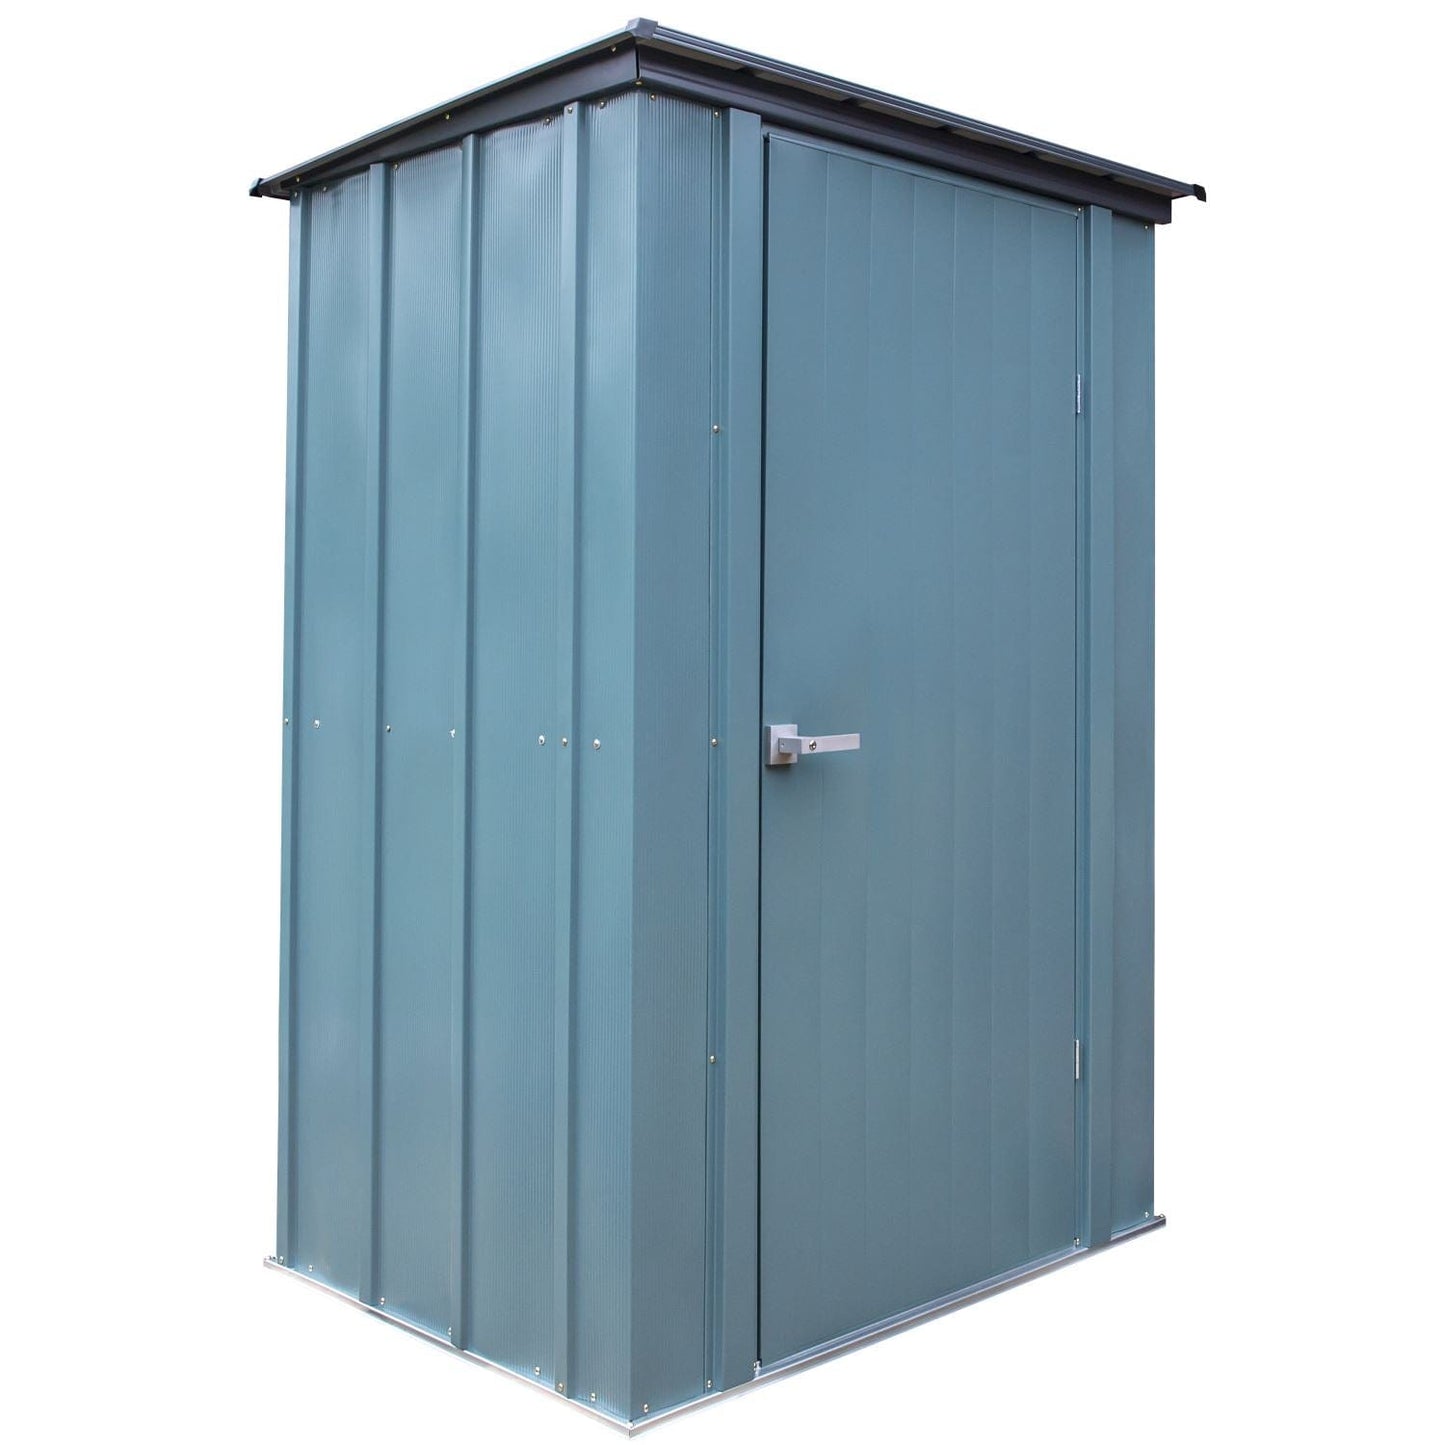 Spacemaker Metal Storage Shed Kit Spacemaker | Patio Shed, 4' x 3' Juniper Berry CY43JB22